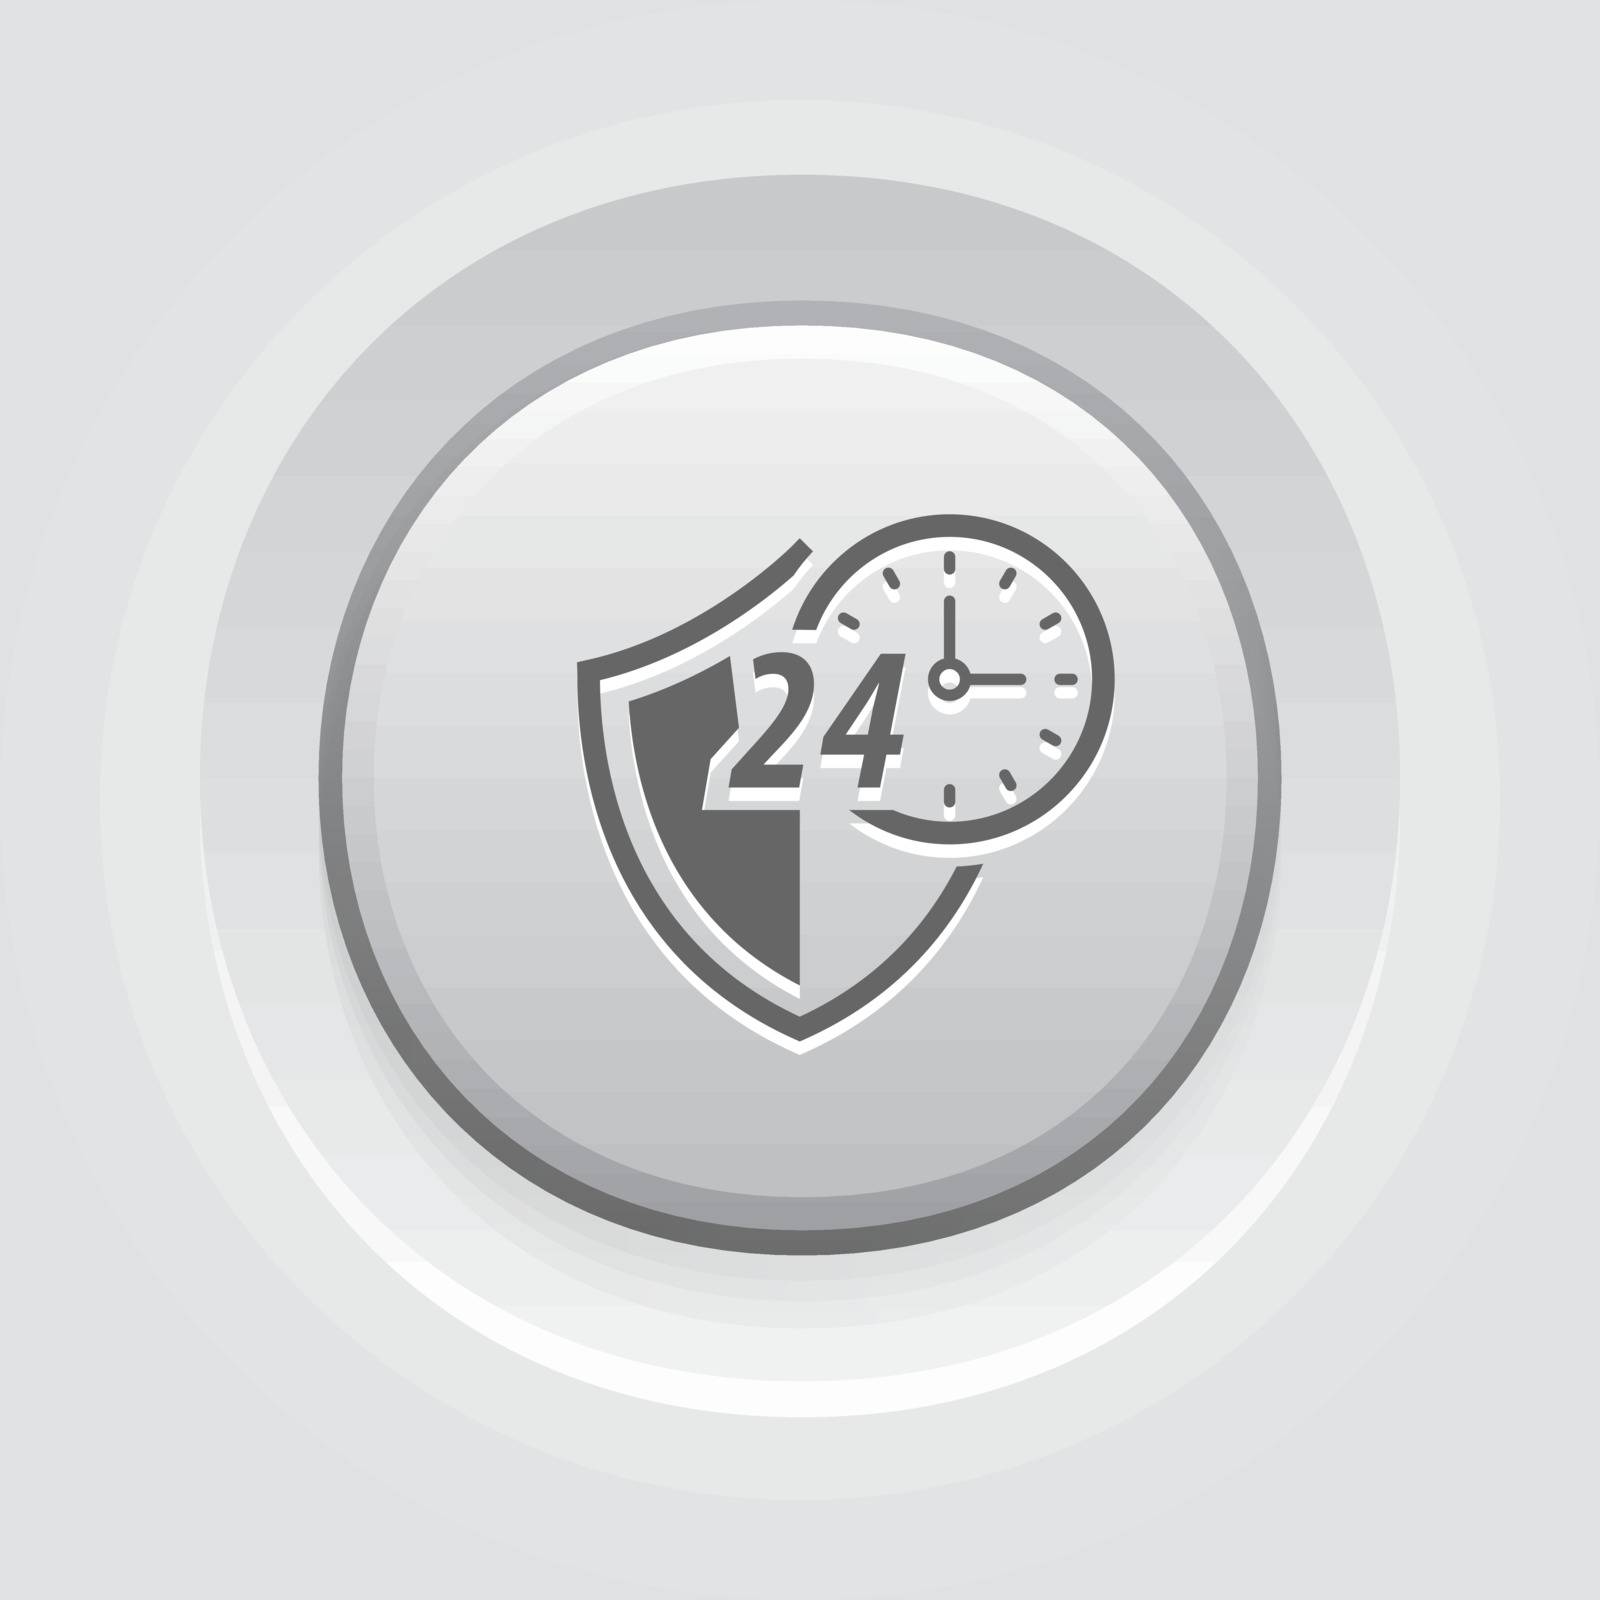 Protected 24-hour Icon. Flat Design. Security Concept with a Shield and a clock. App Symbol or UI element. Grey Button Design